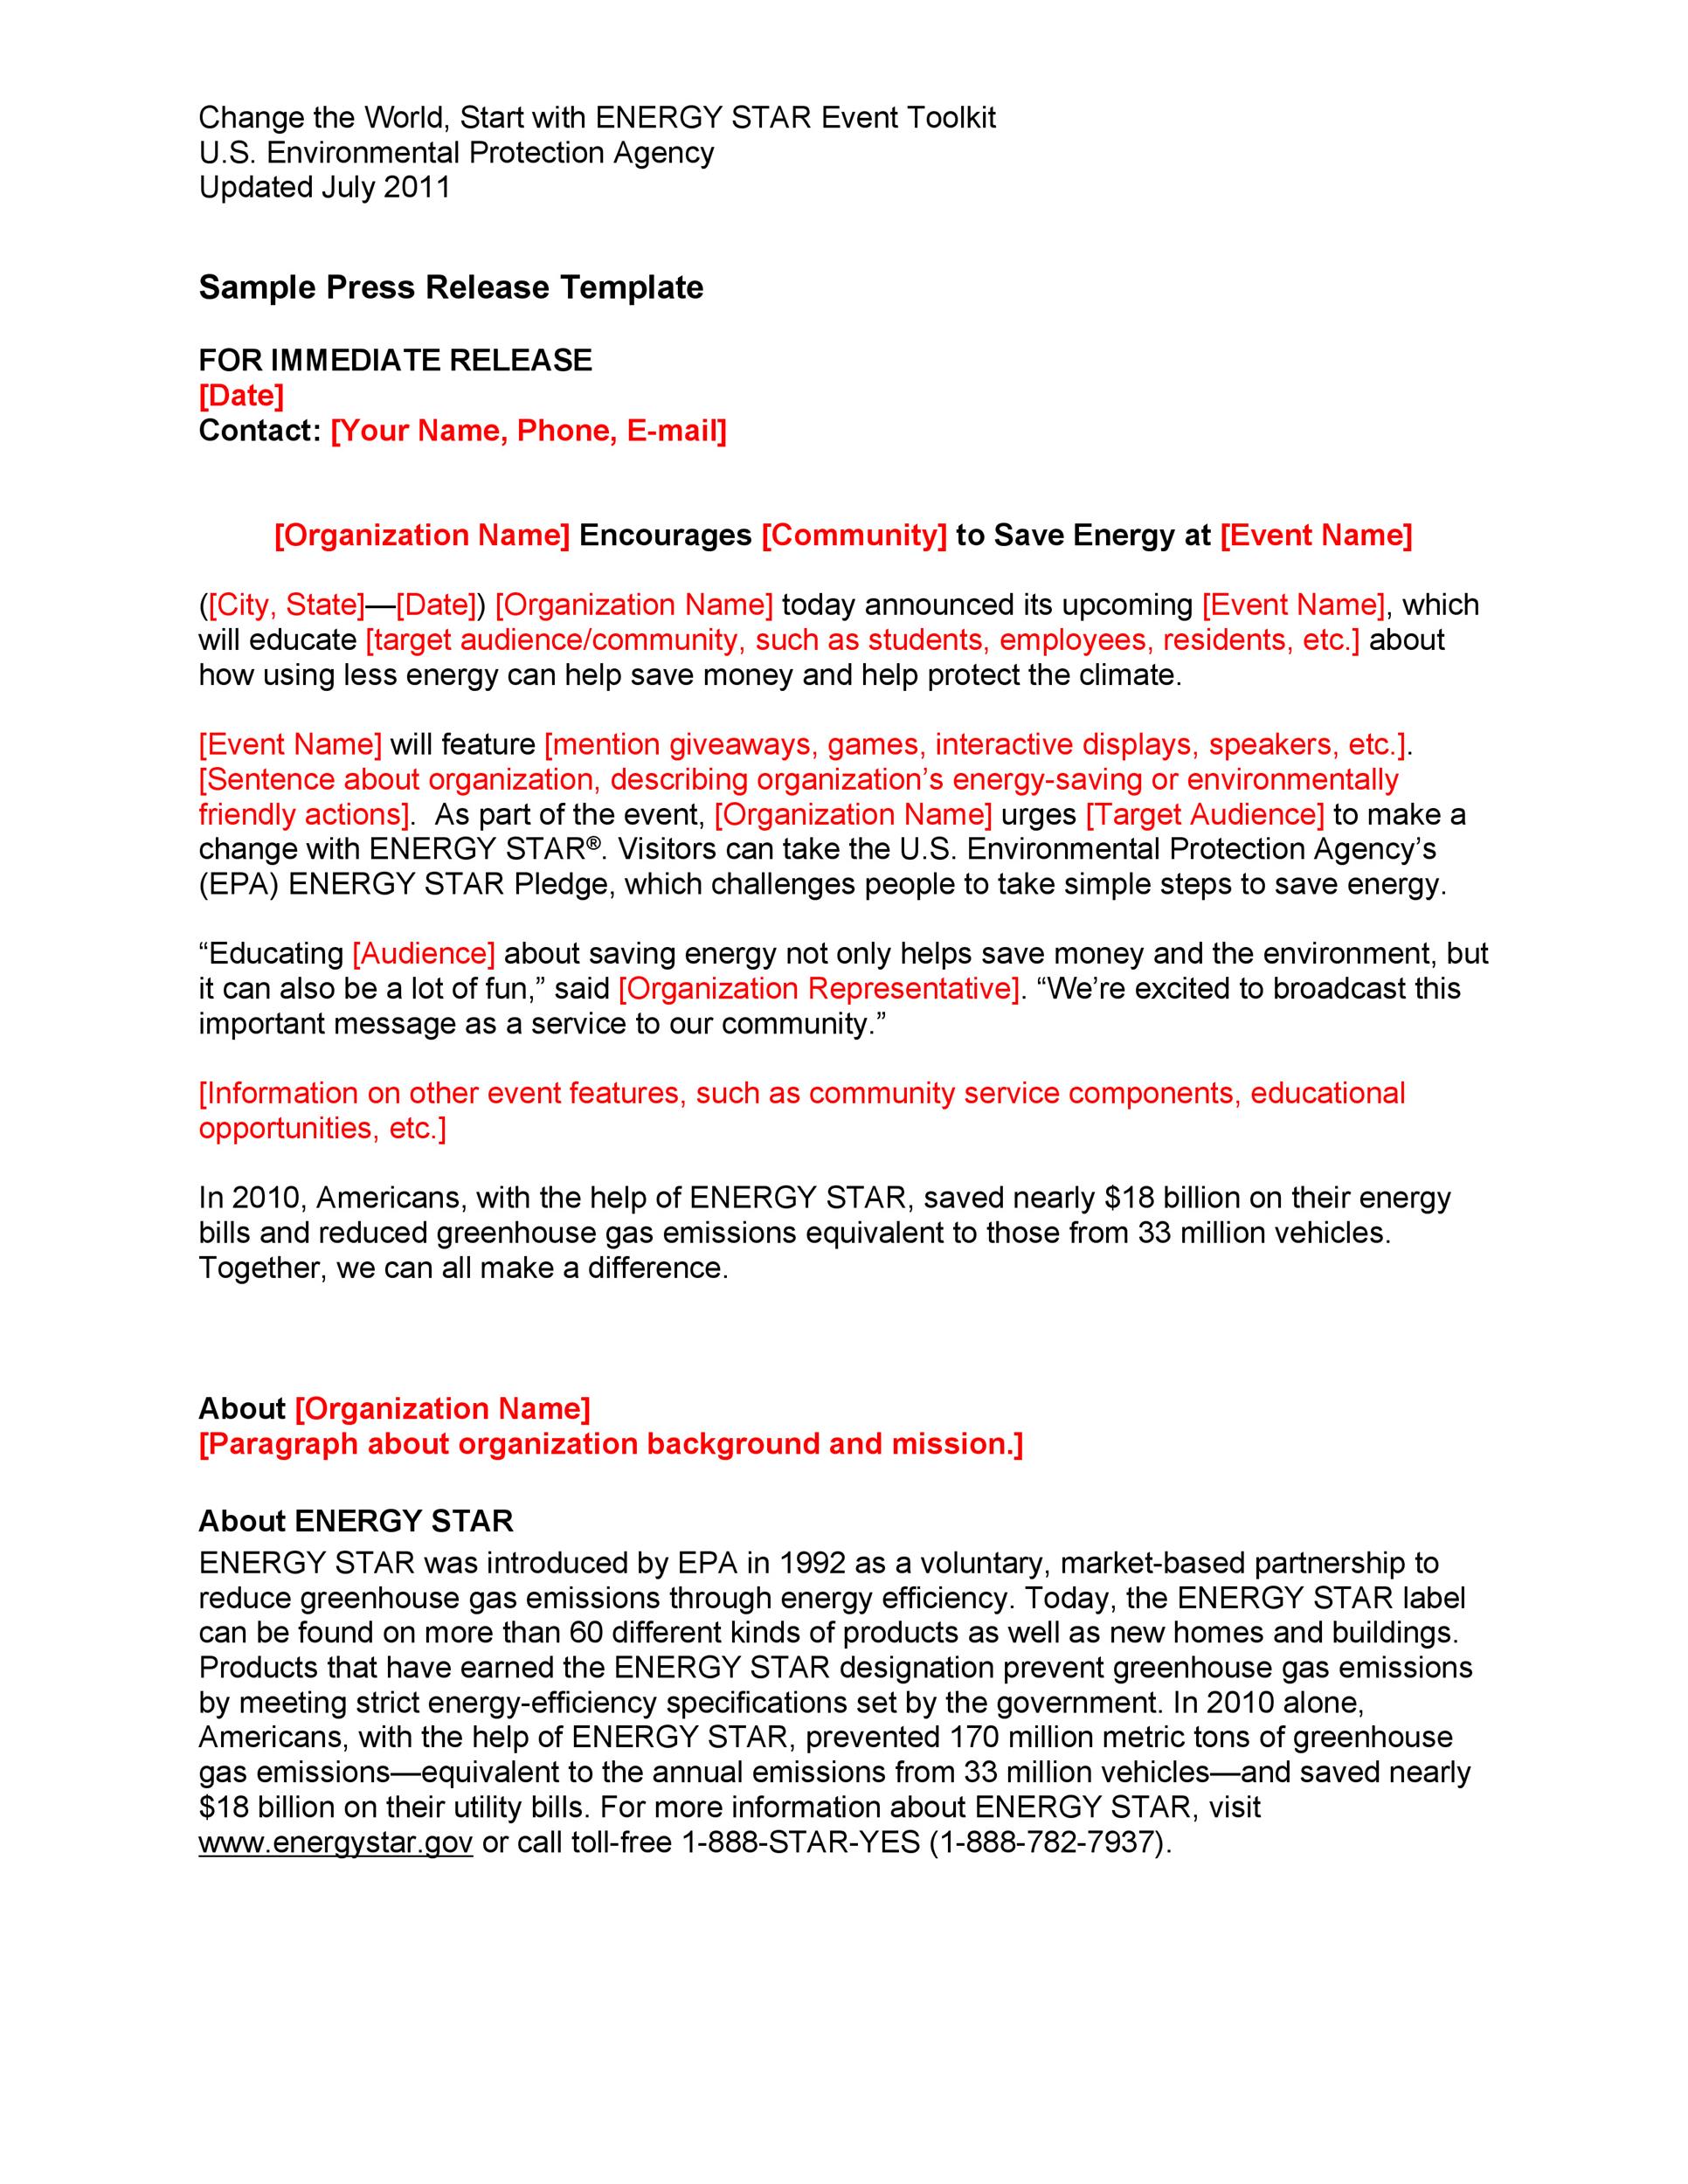 Free Press release template 44